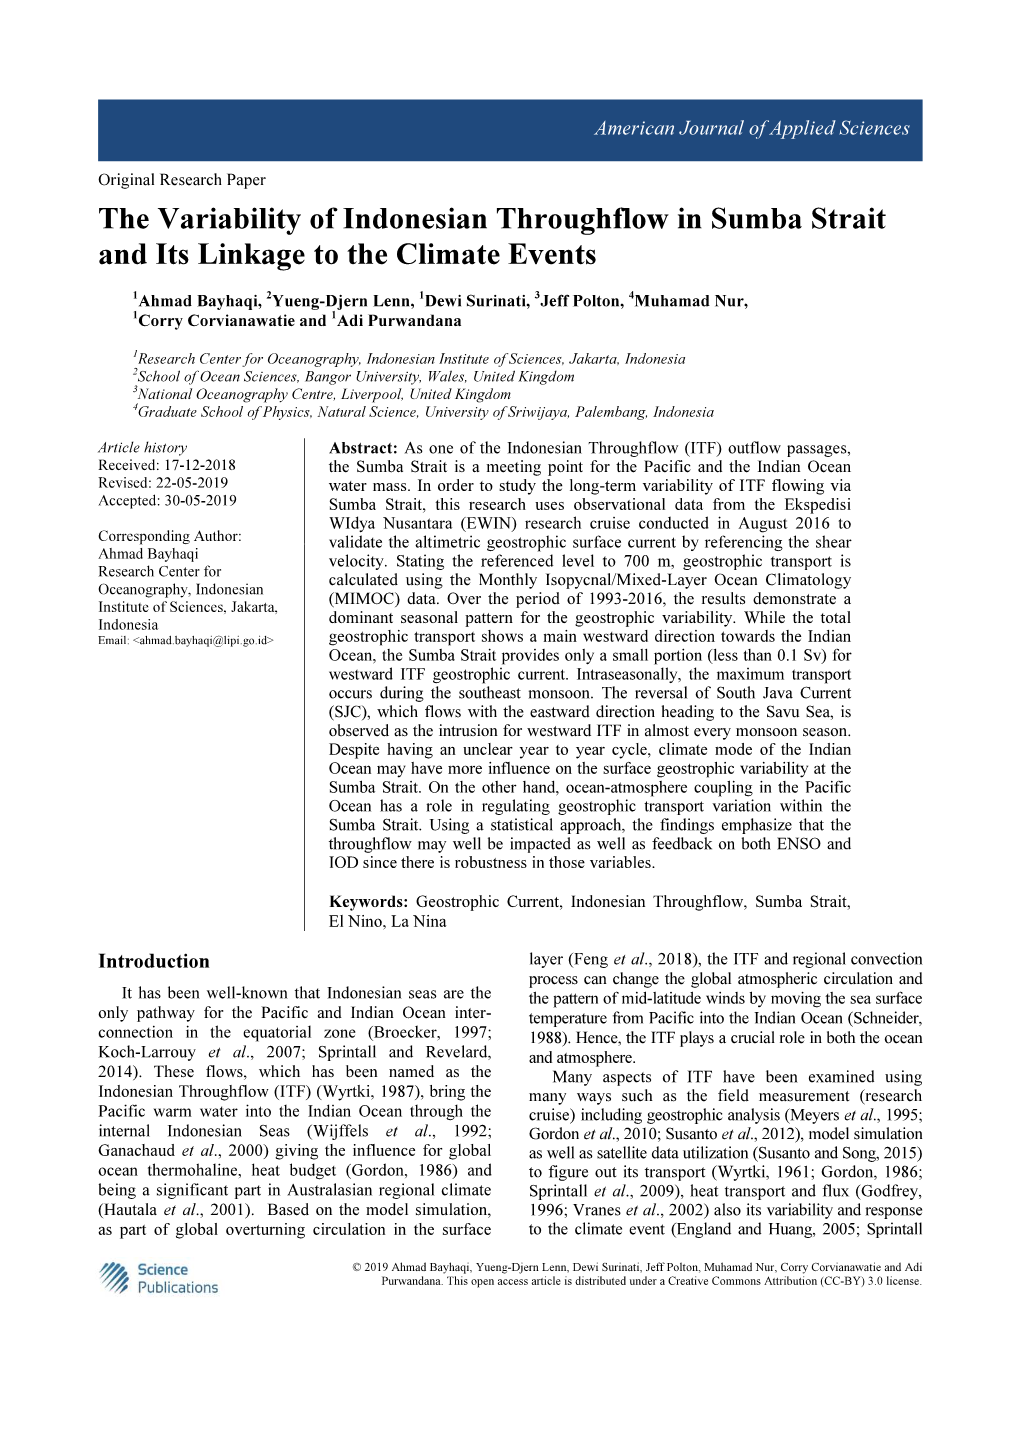 The Variability of Indonesian Throughflow in Sumba Strait and Its Linkage to the Climate Events